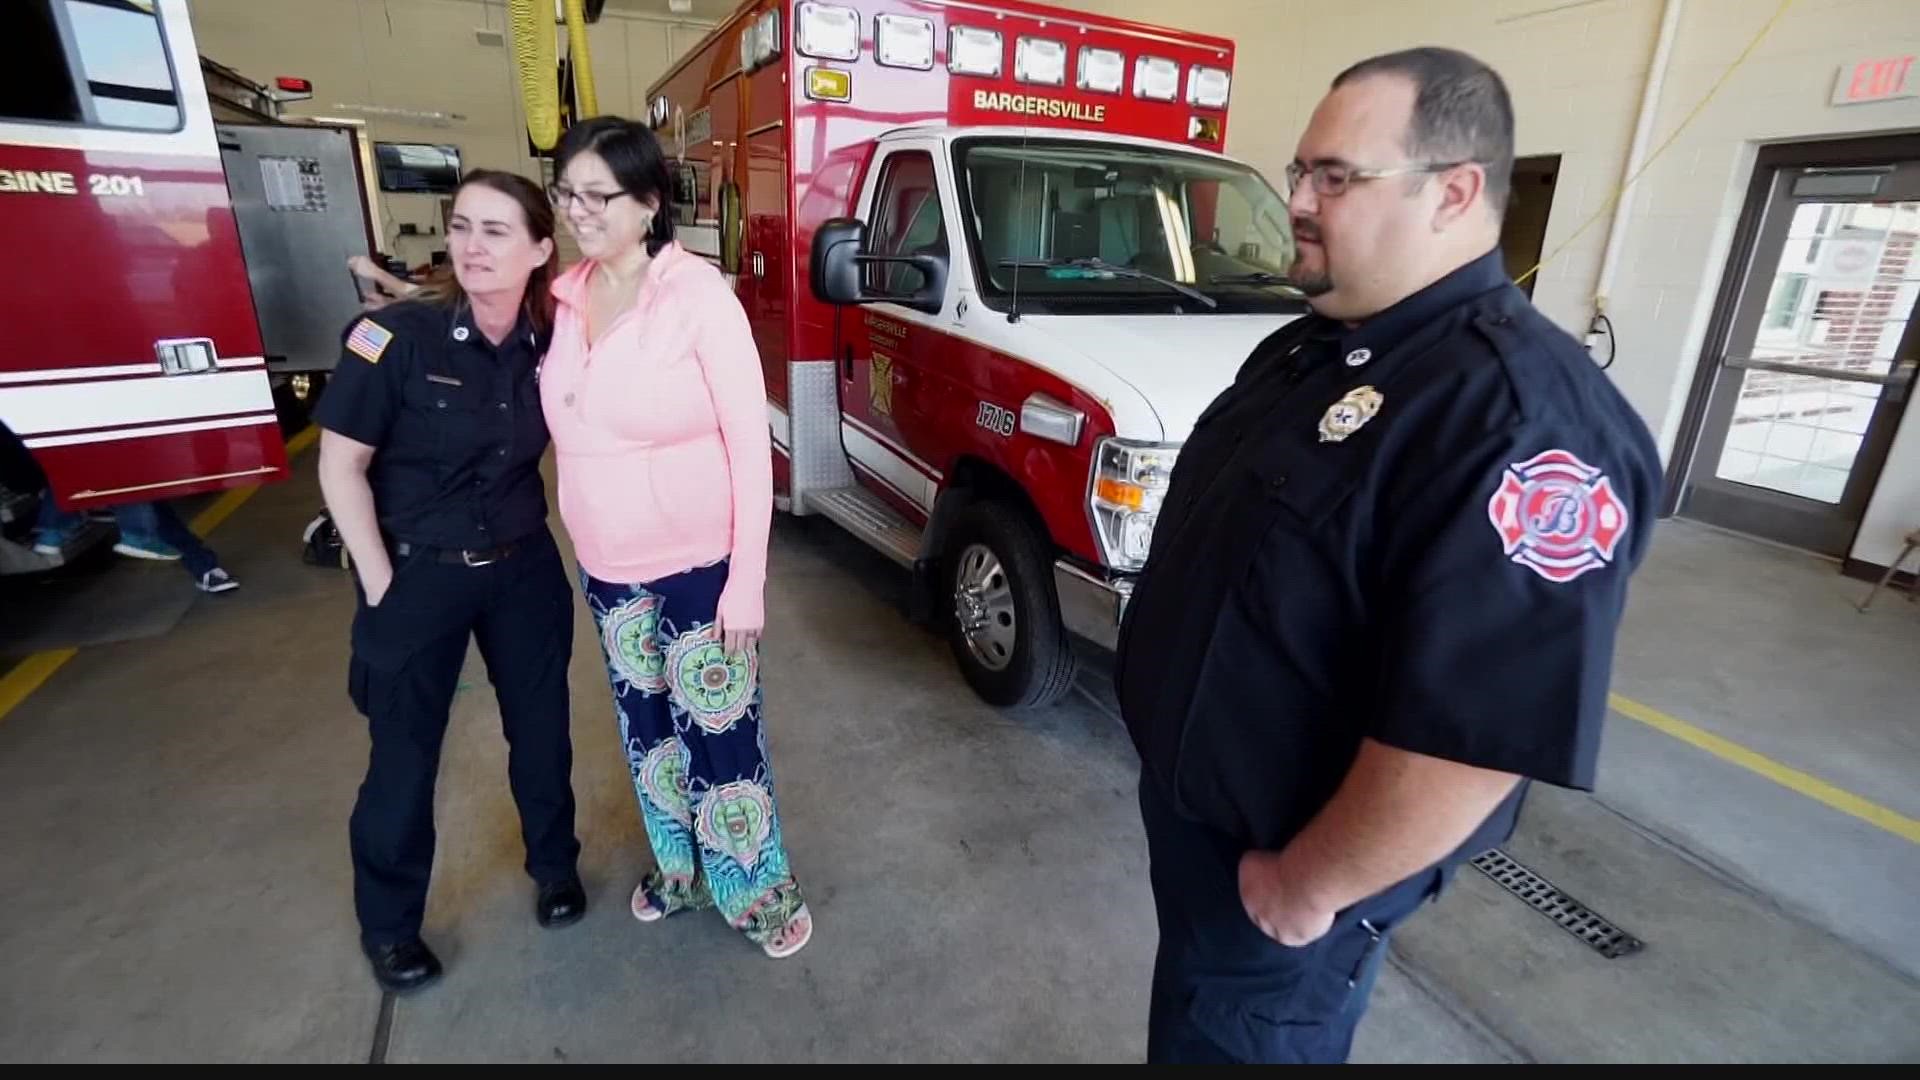 A woman who got to a life-saving transplant with just seconds to spare got thank the firefighters who helped her get to the hospital.